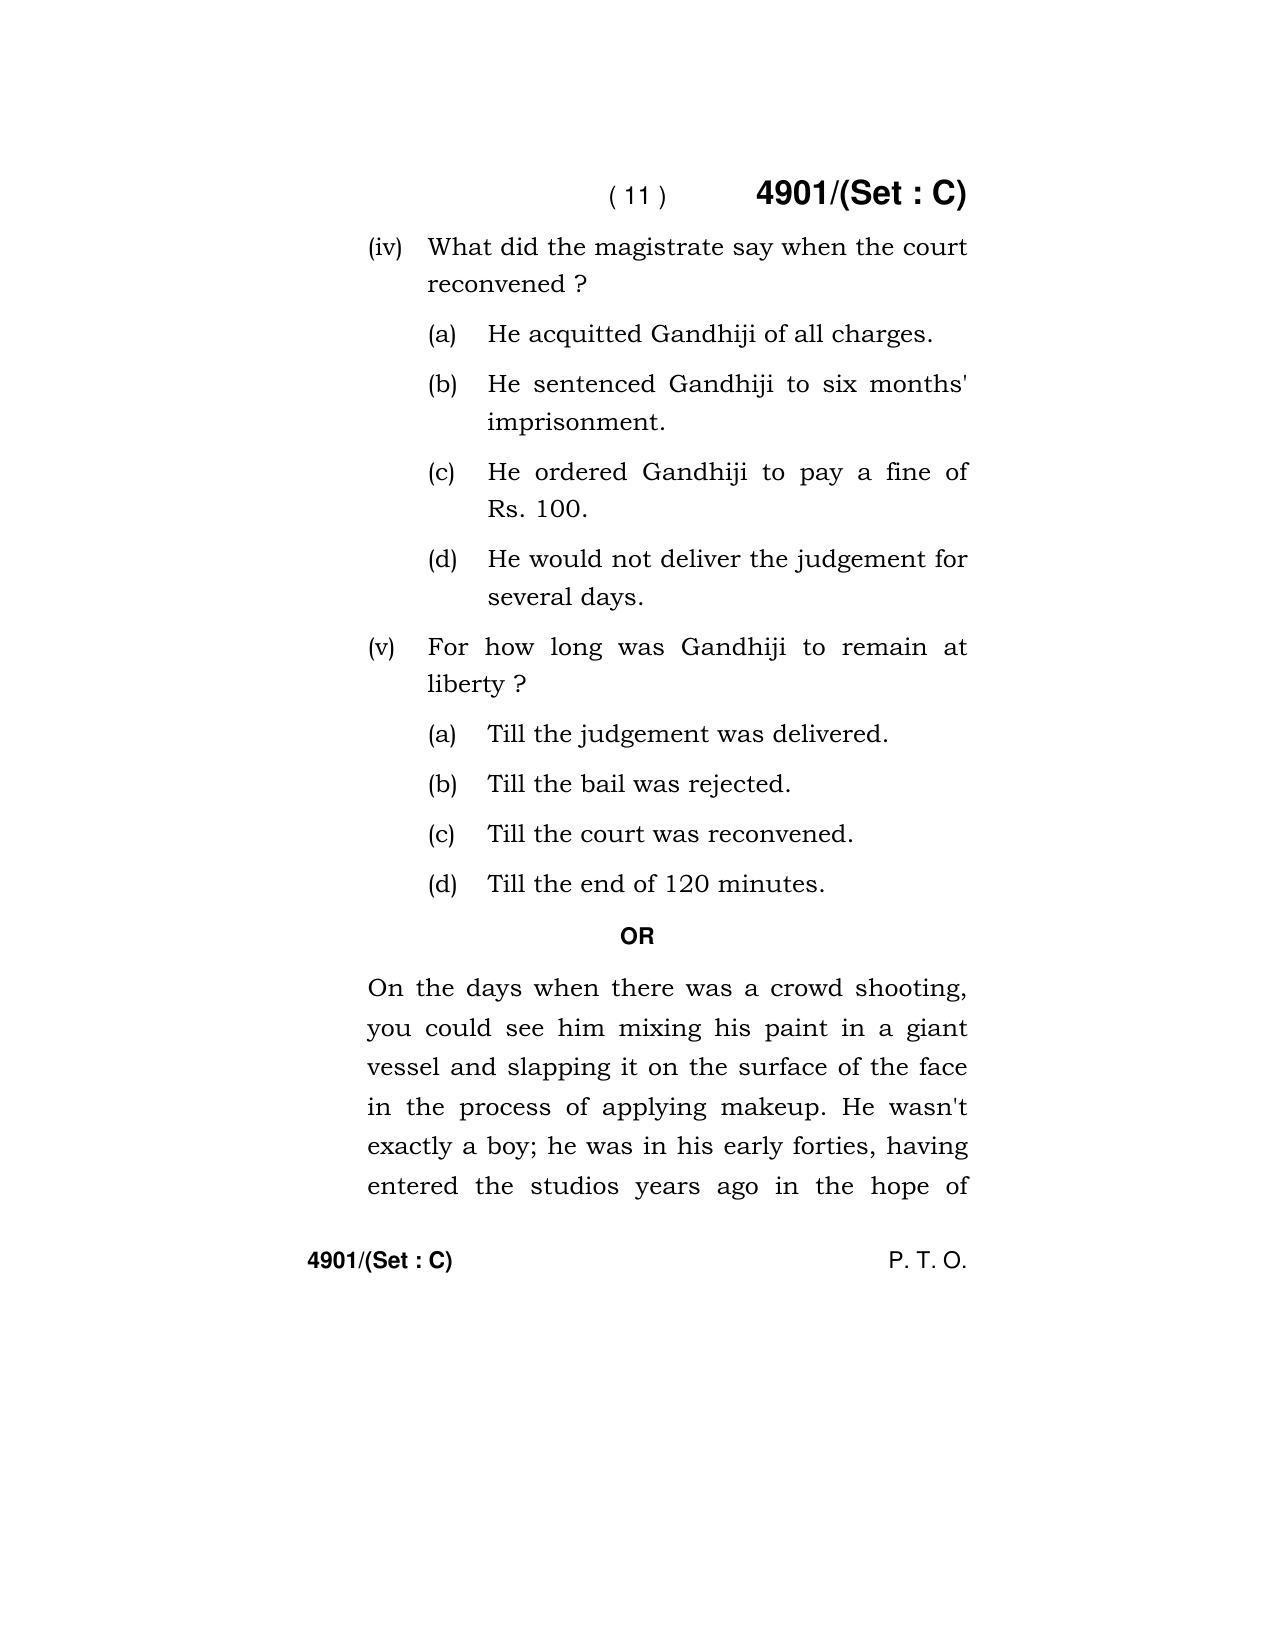 Haryana Board HBSE Class 12 English Core 2020 Question Paper - Page 43